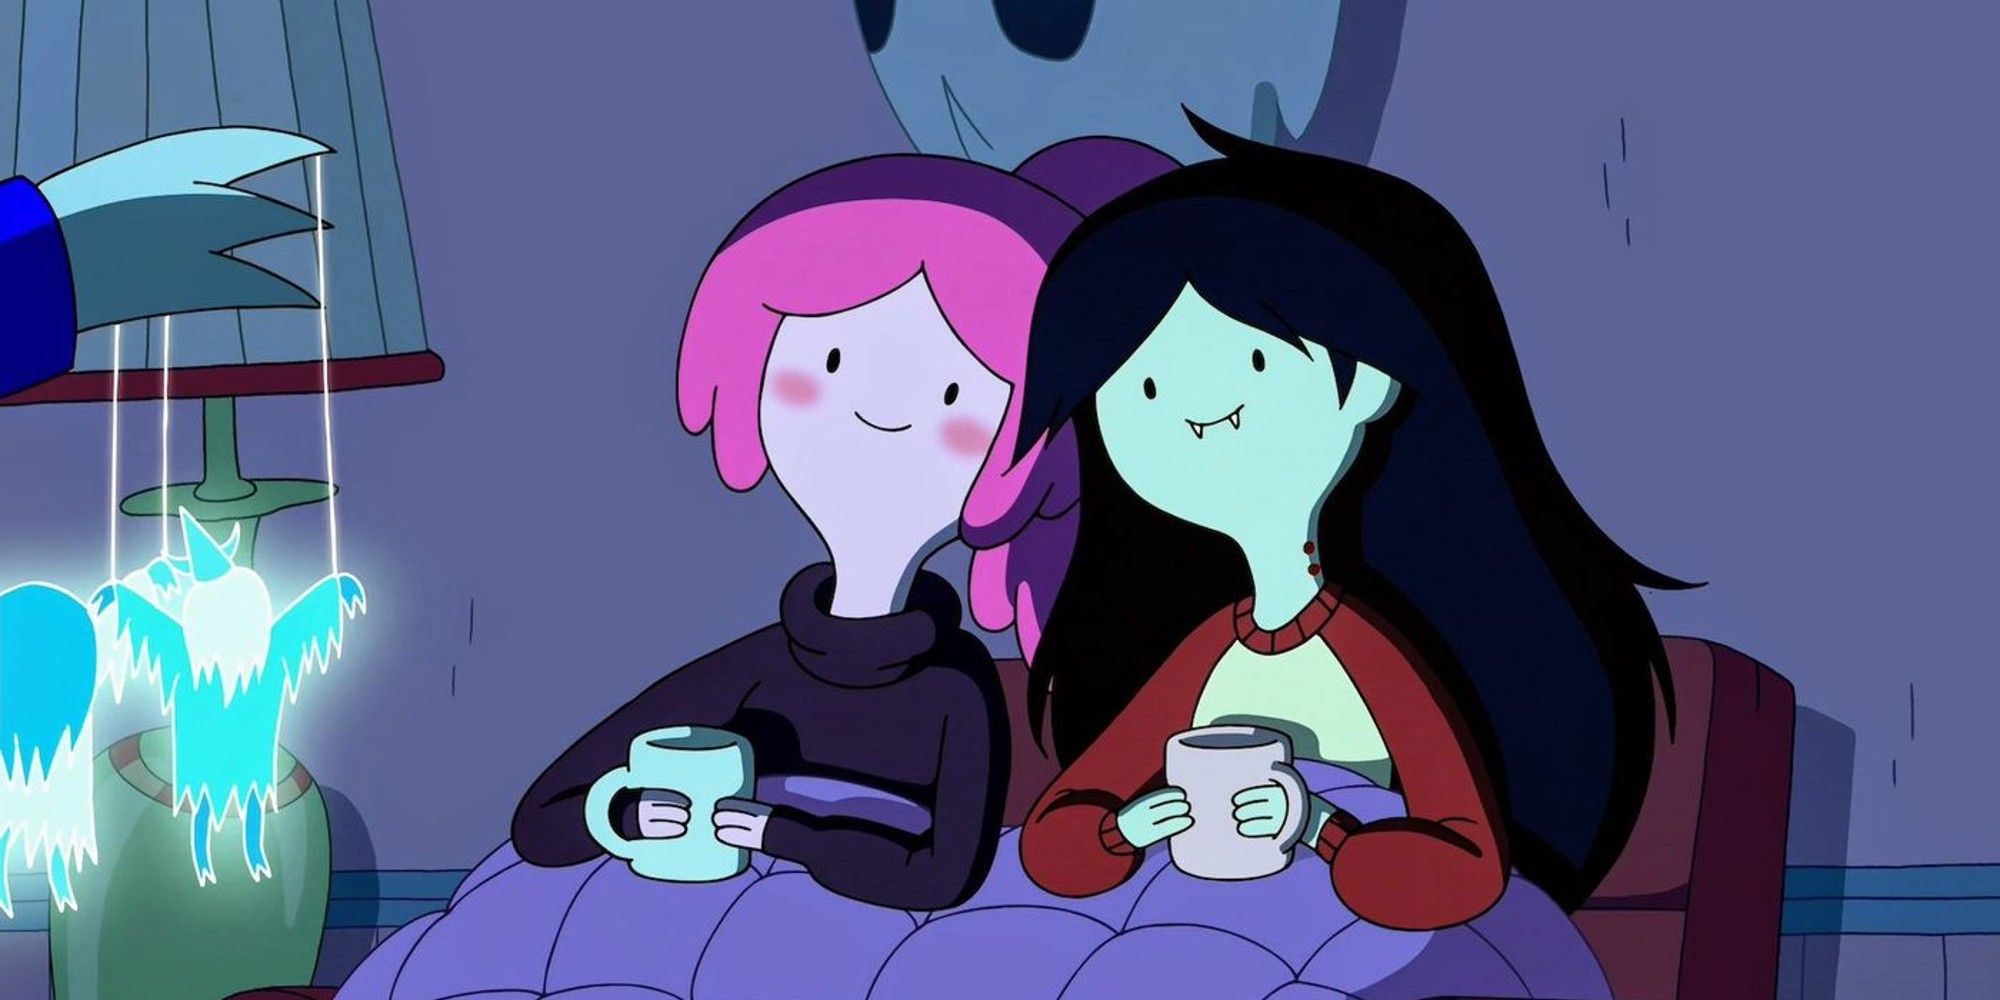 Marceline and Princess Bubblegum from Adventure Time